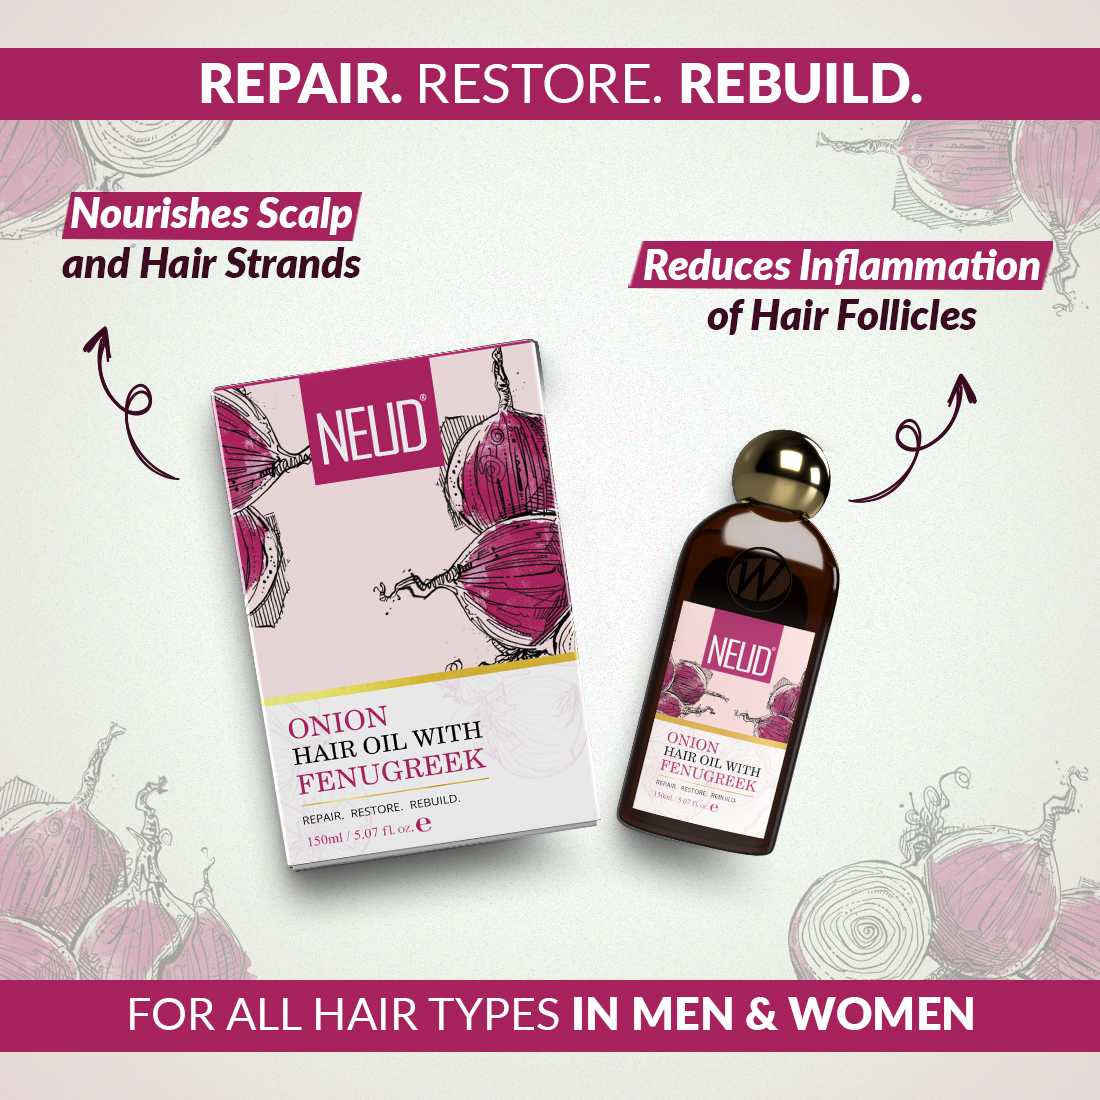 NEUD Combo - Onion Hair Oil and Shampoo with Fenugreek for Men & Women